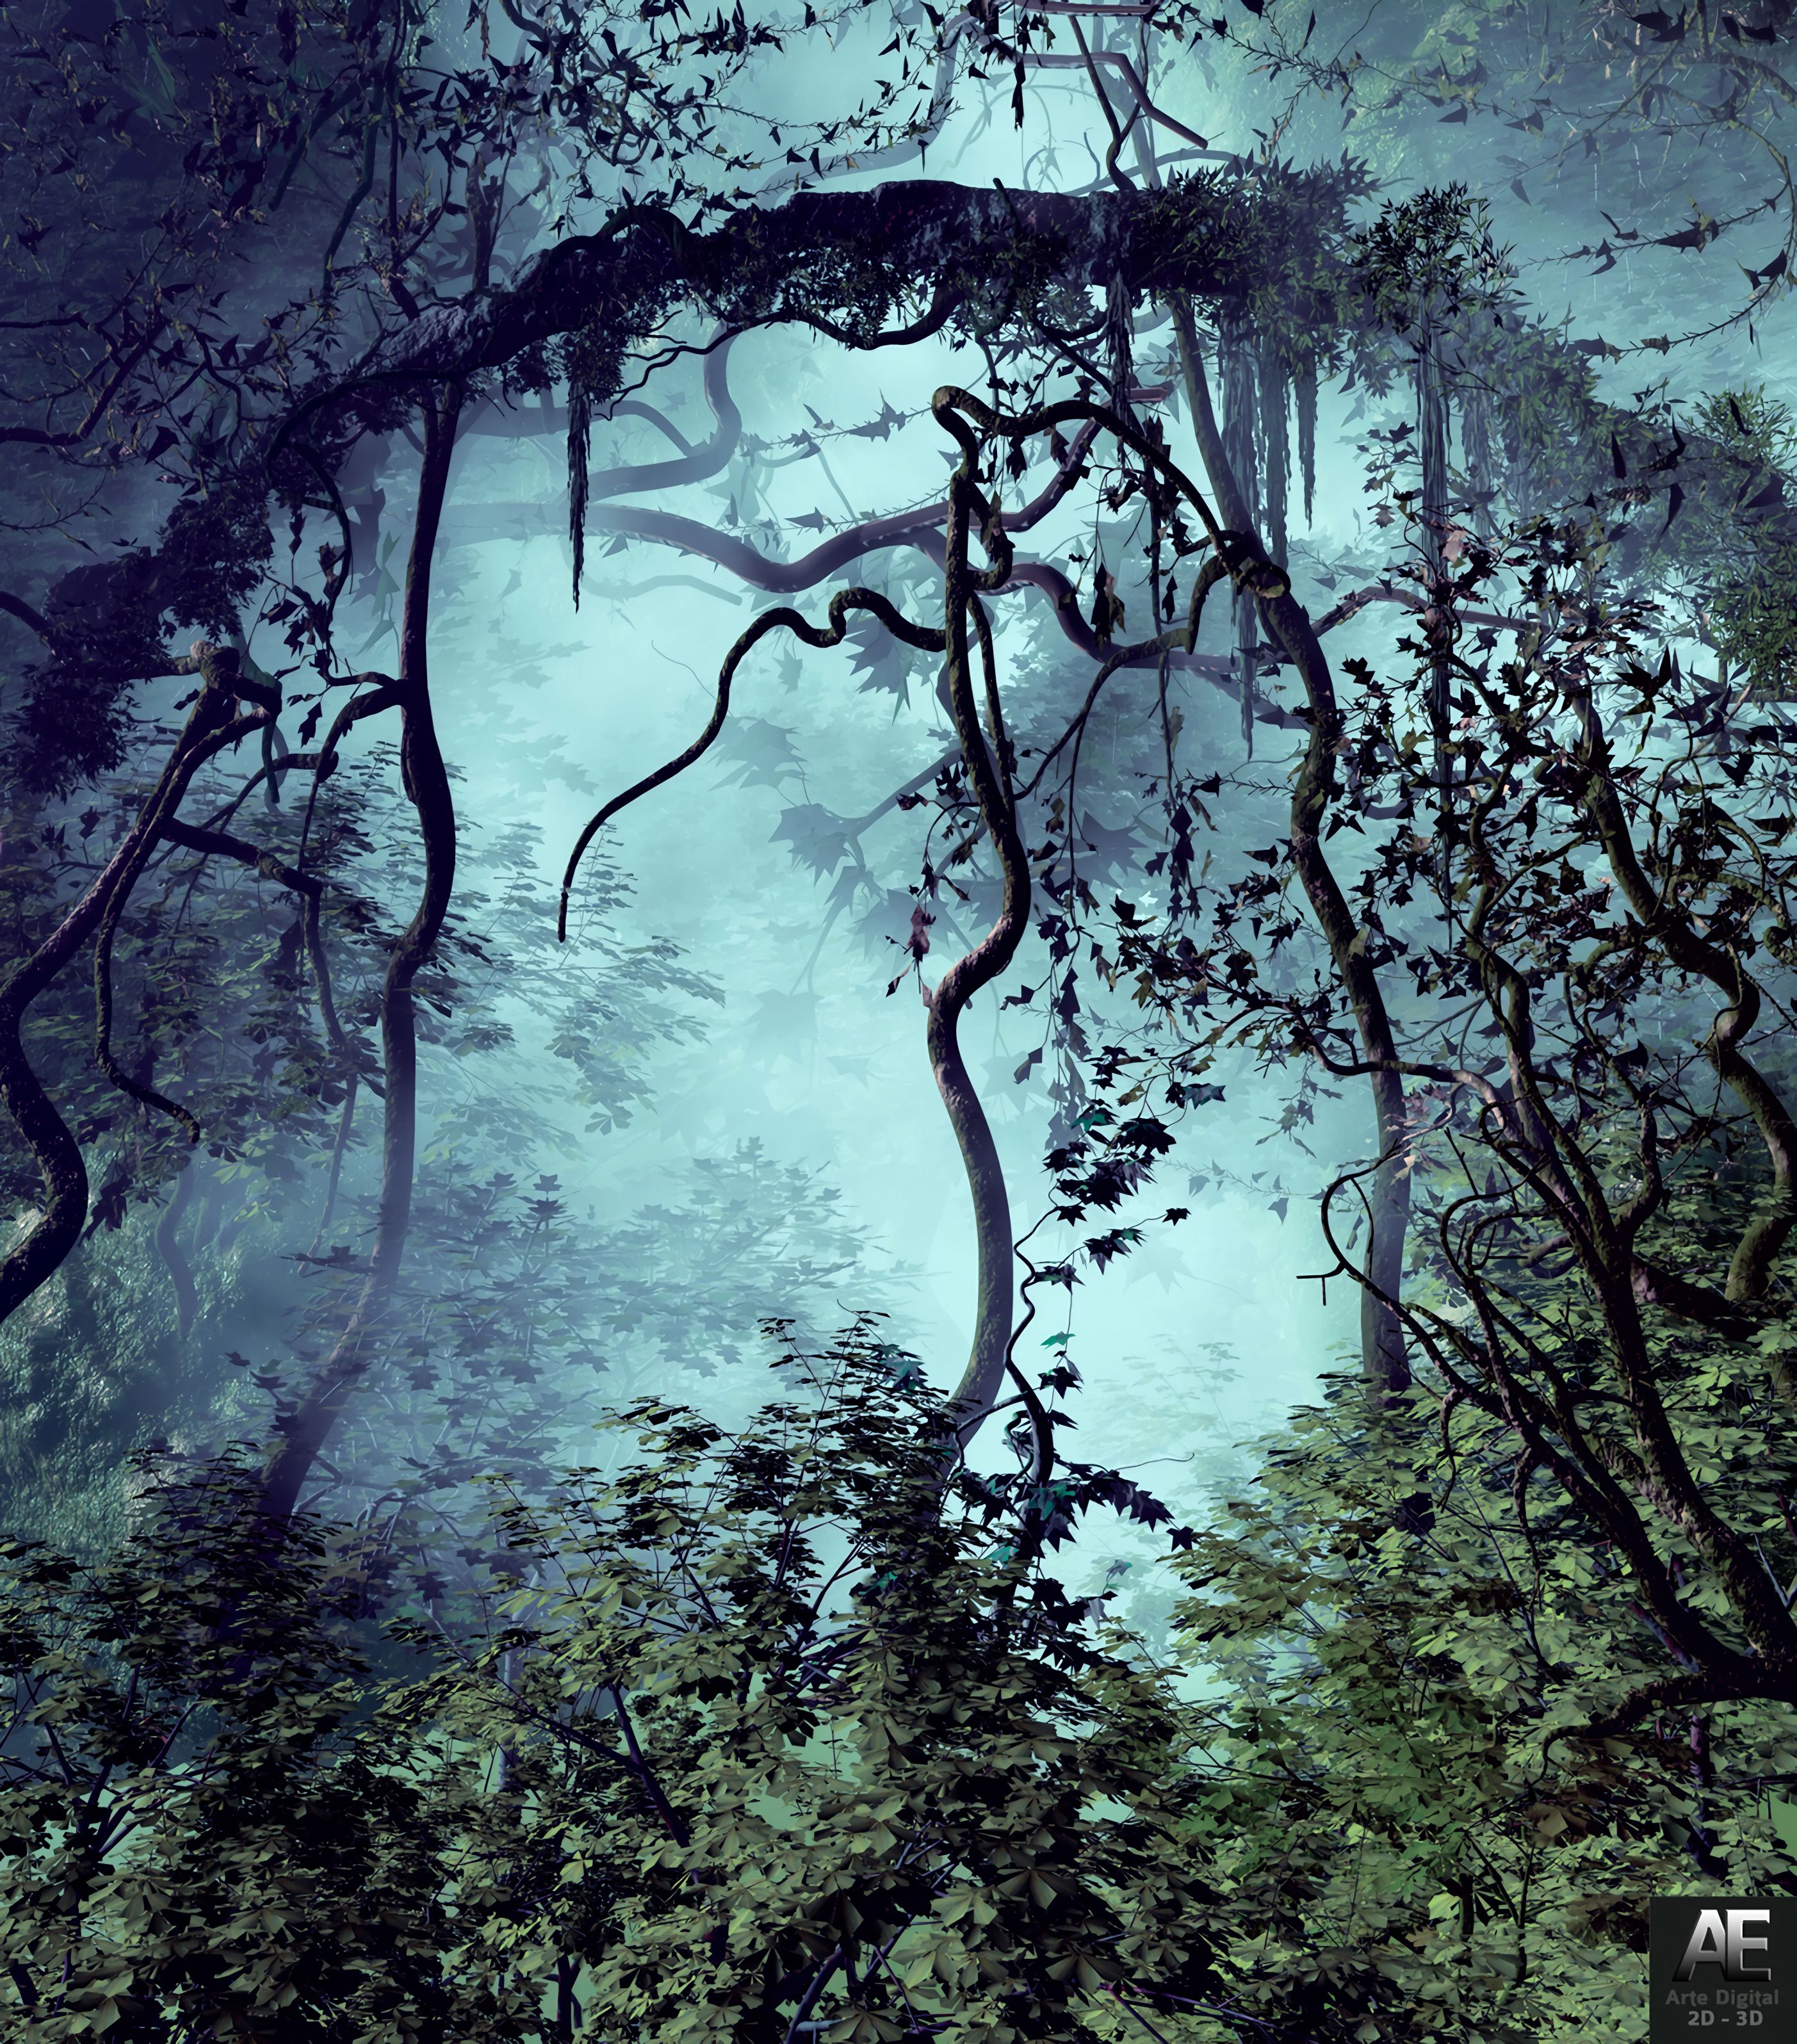 1080p pic branches, fog, trees, art